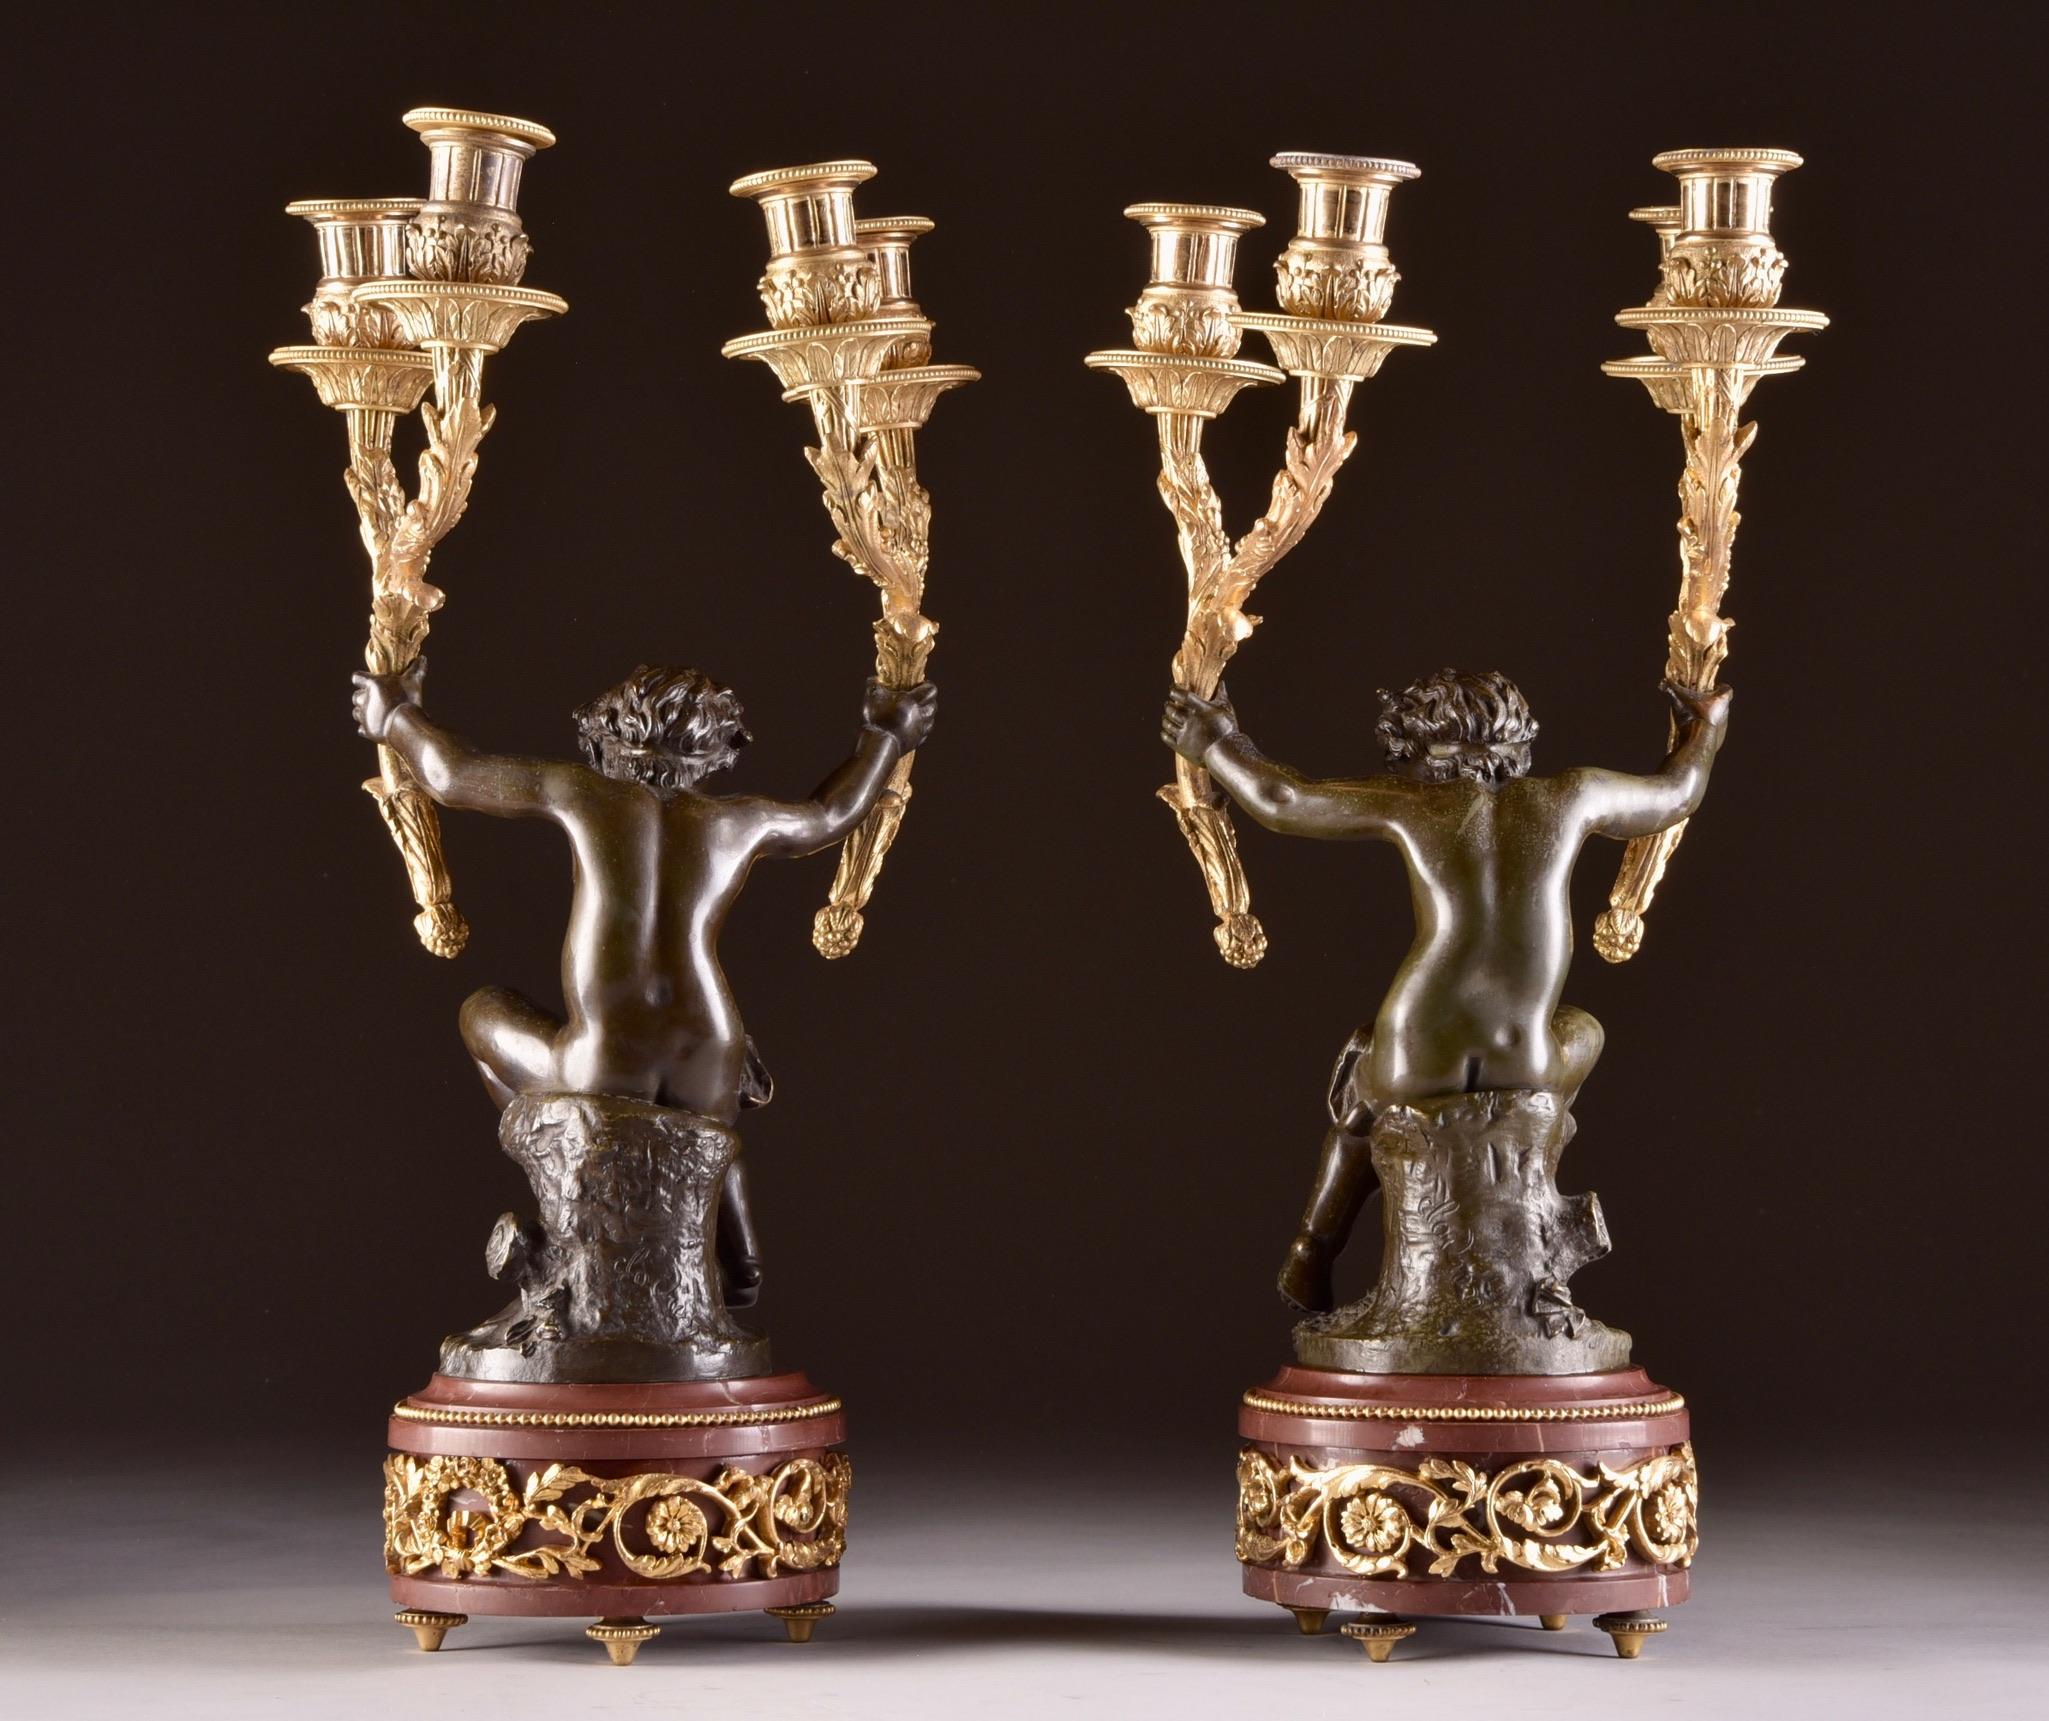 Very stylish French bronze patinated and gilded candlesticks, with putti, Signed Clodion (Claude Michel Clodion, 1738-1814) in very good condition. Weight is 7.5 kg each.
Dimensions: 46 x 25 x 20 cm
Weight: 15 kg.

  